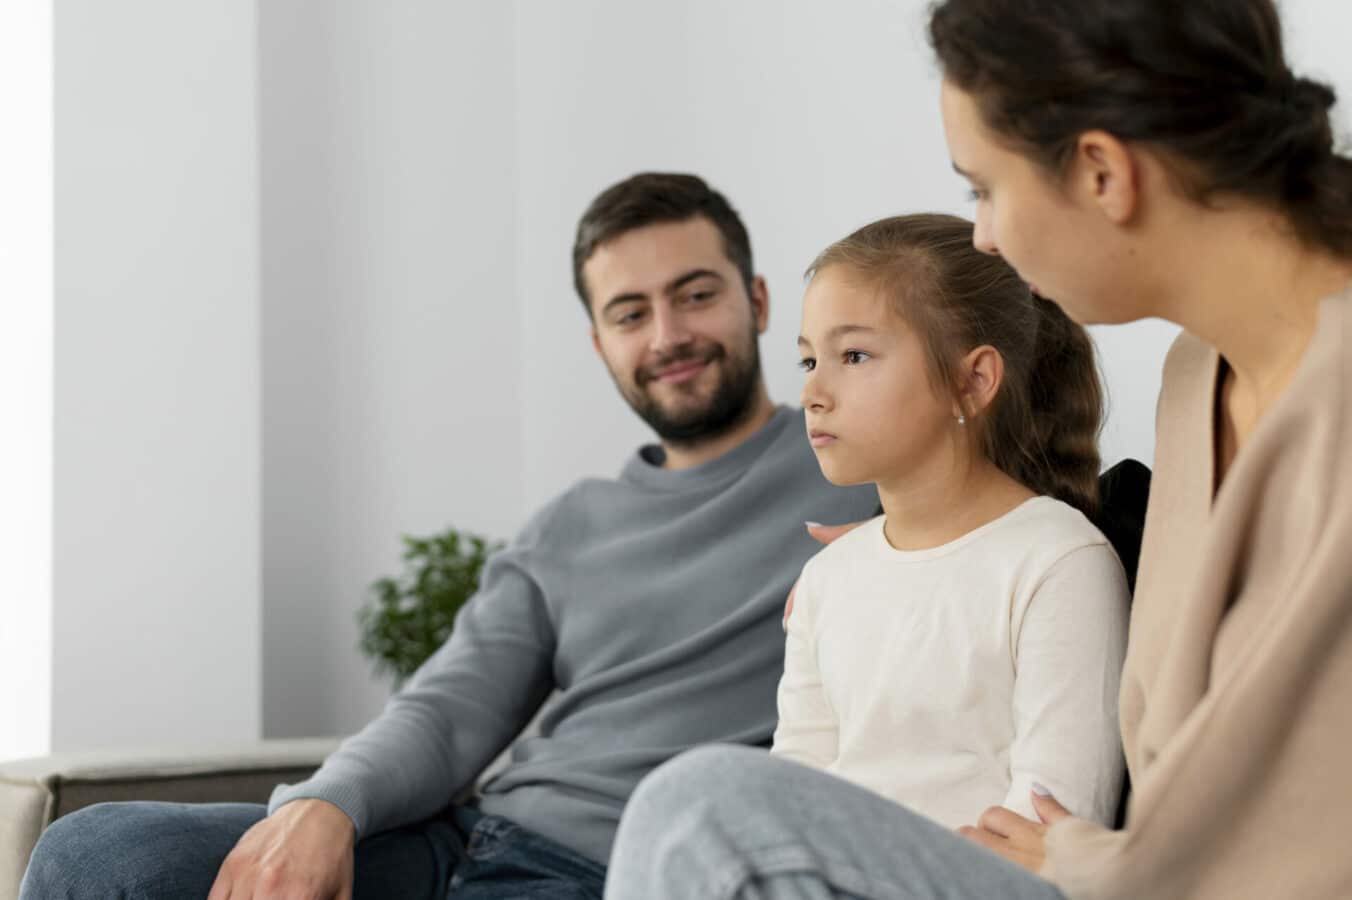 Family therapy can provide a safe space for both mother and child to work through their issues and improve their relationship.